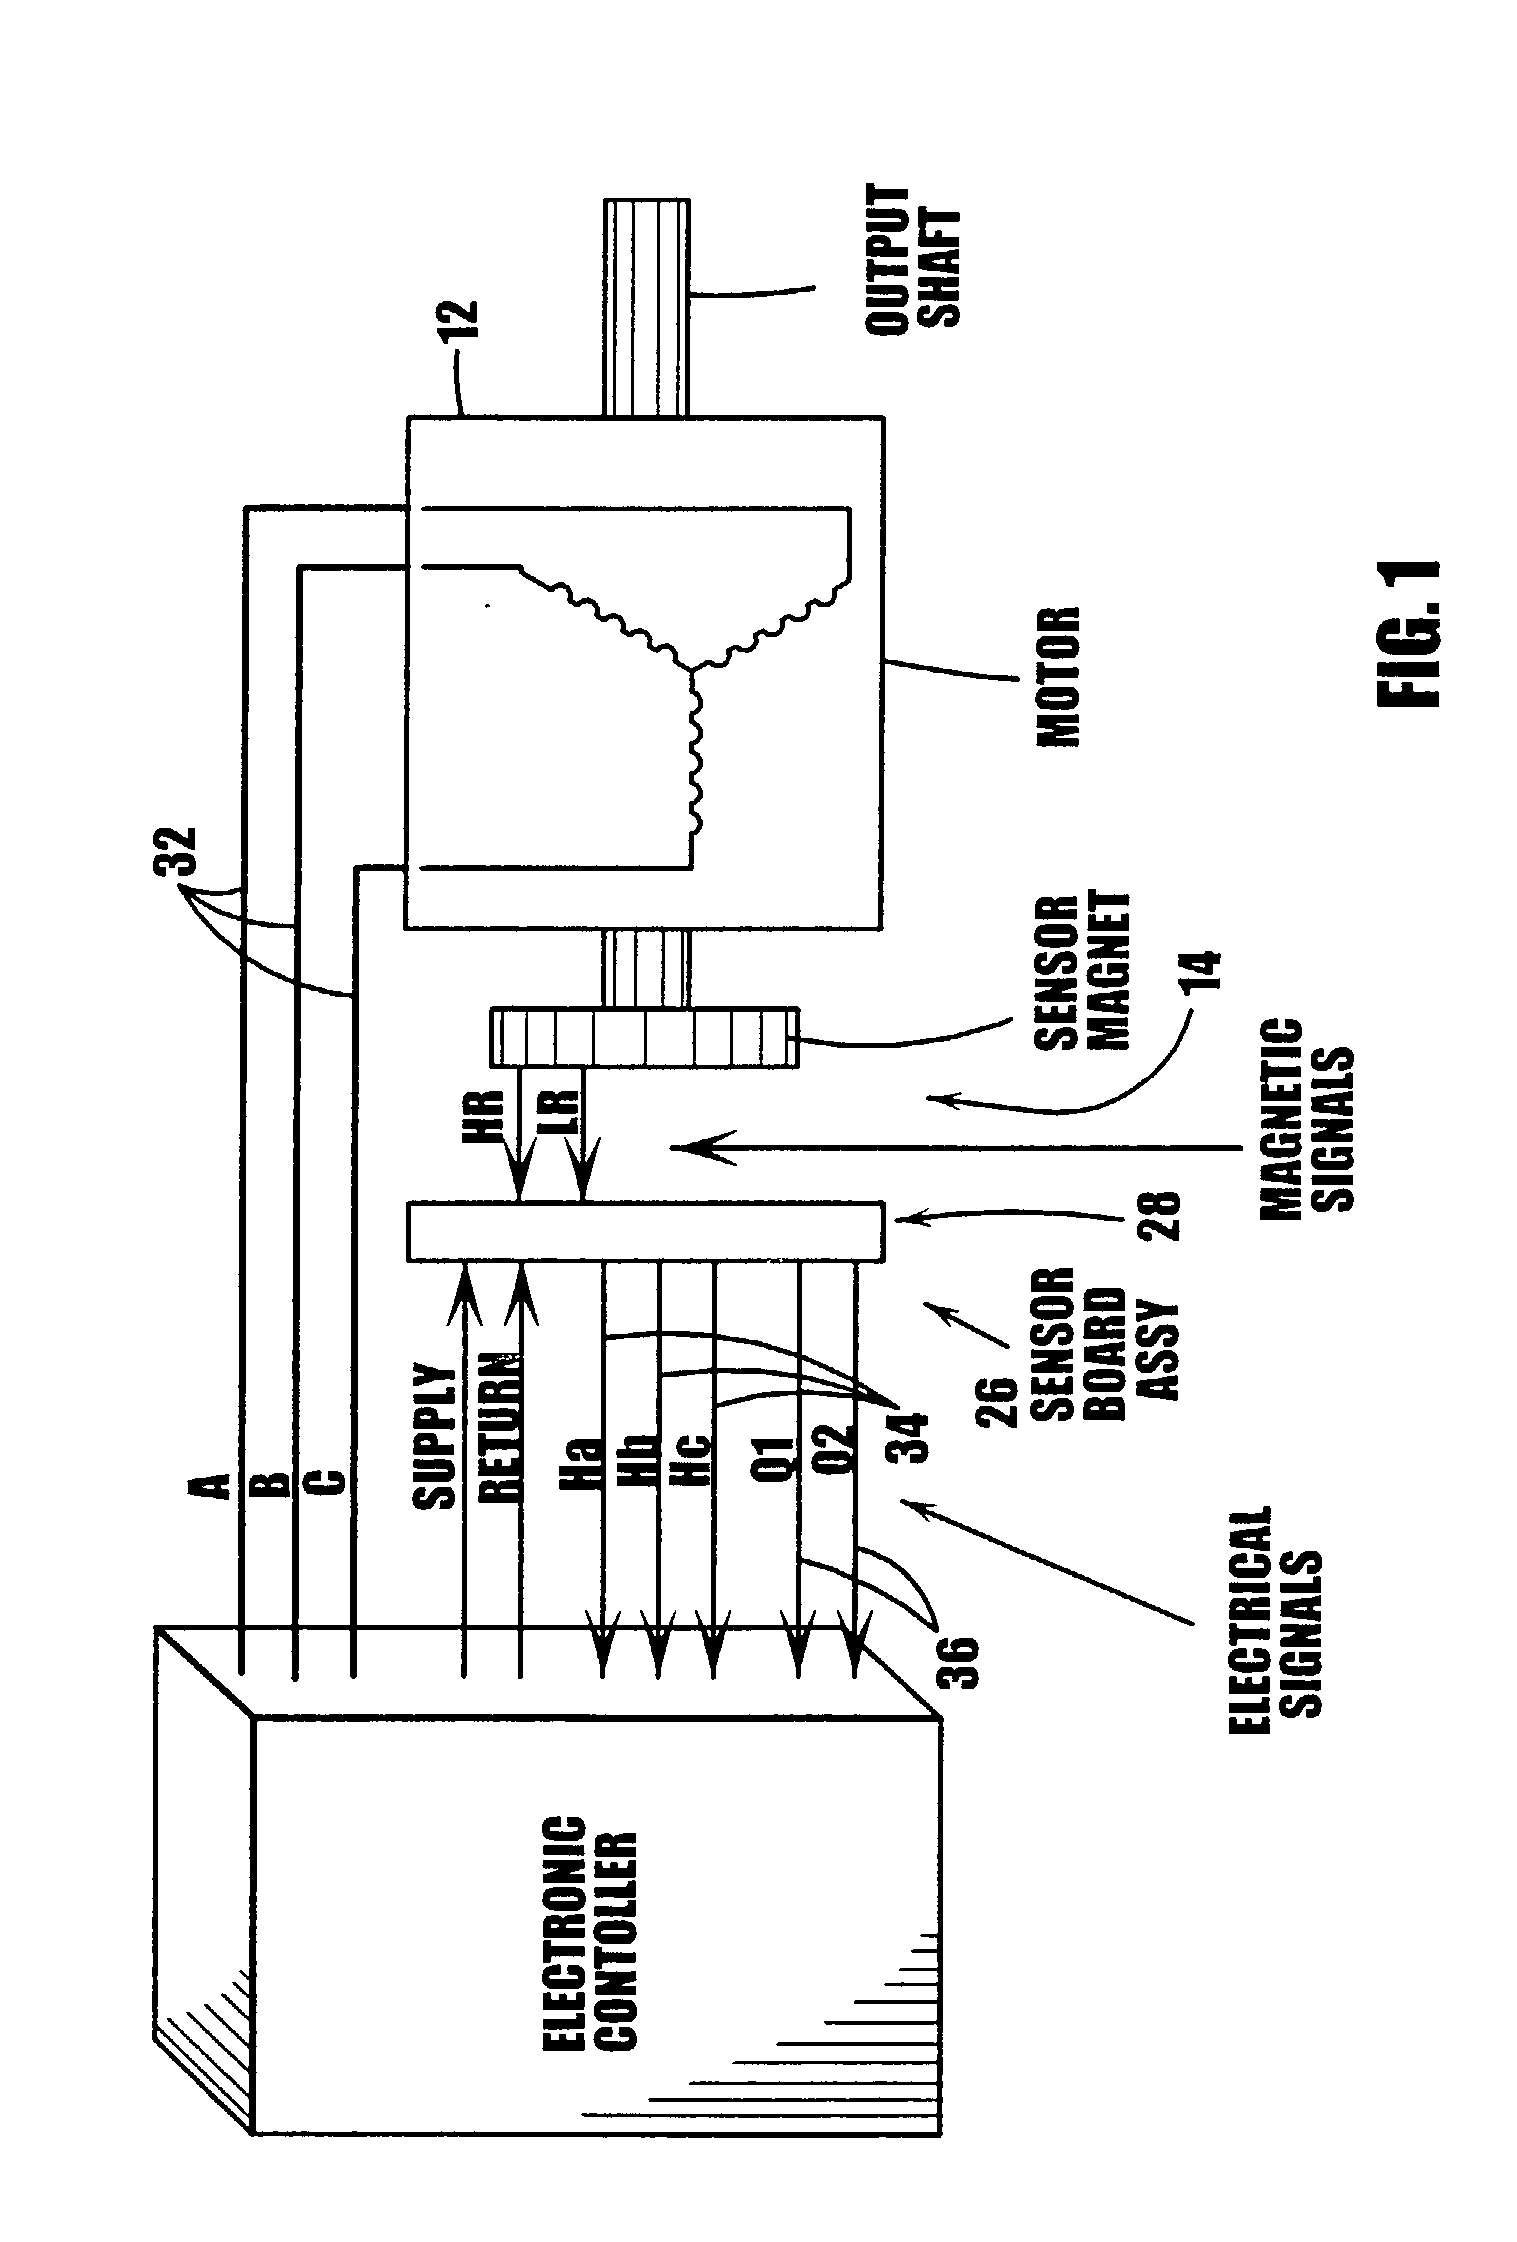 Method and apparatus for calibrating and initializing an electronically commutated motor